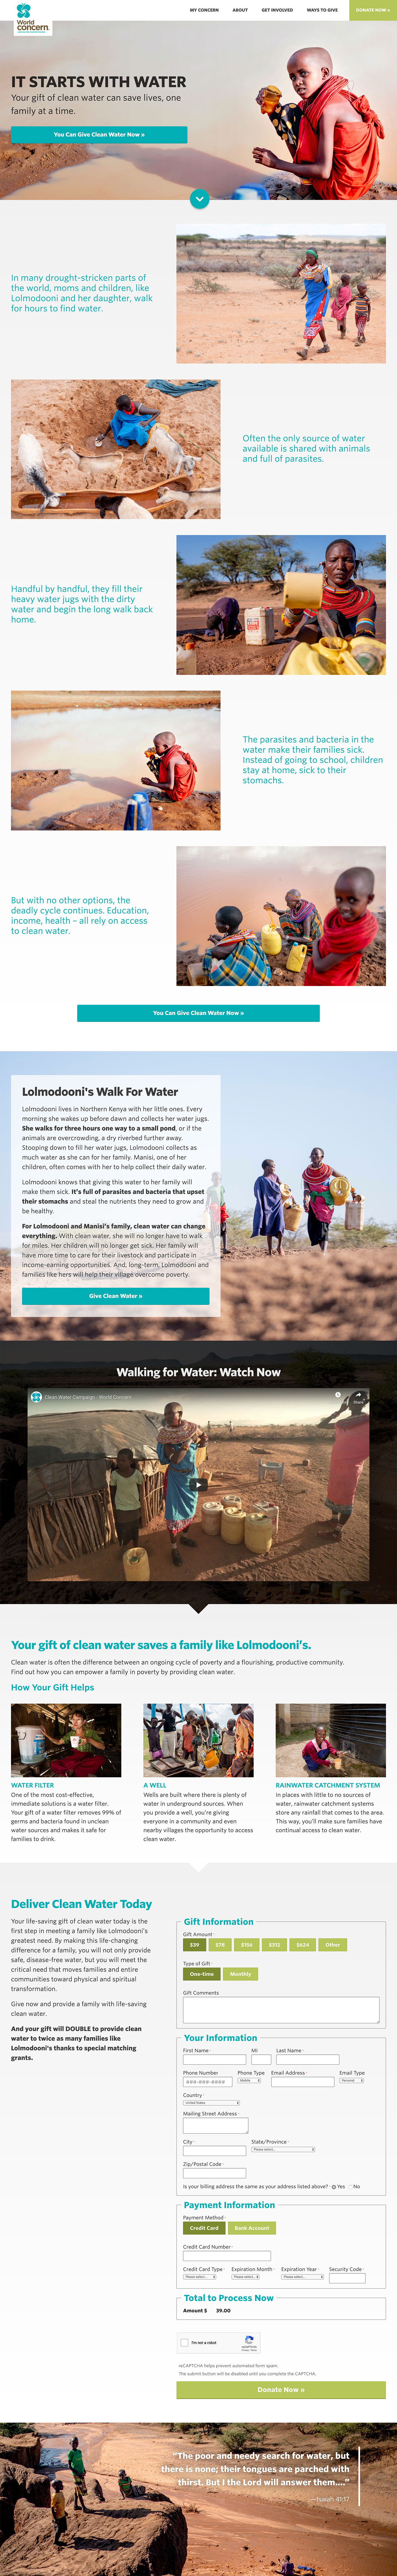 worldconcern-water-campaign